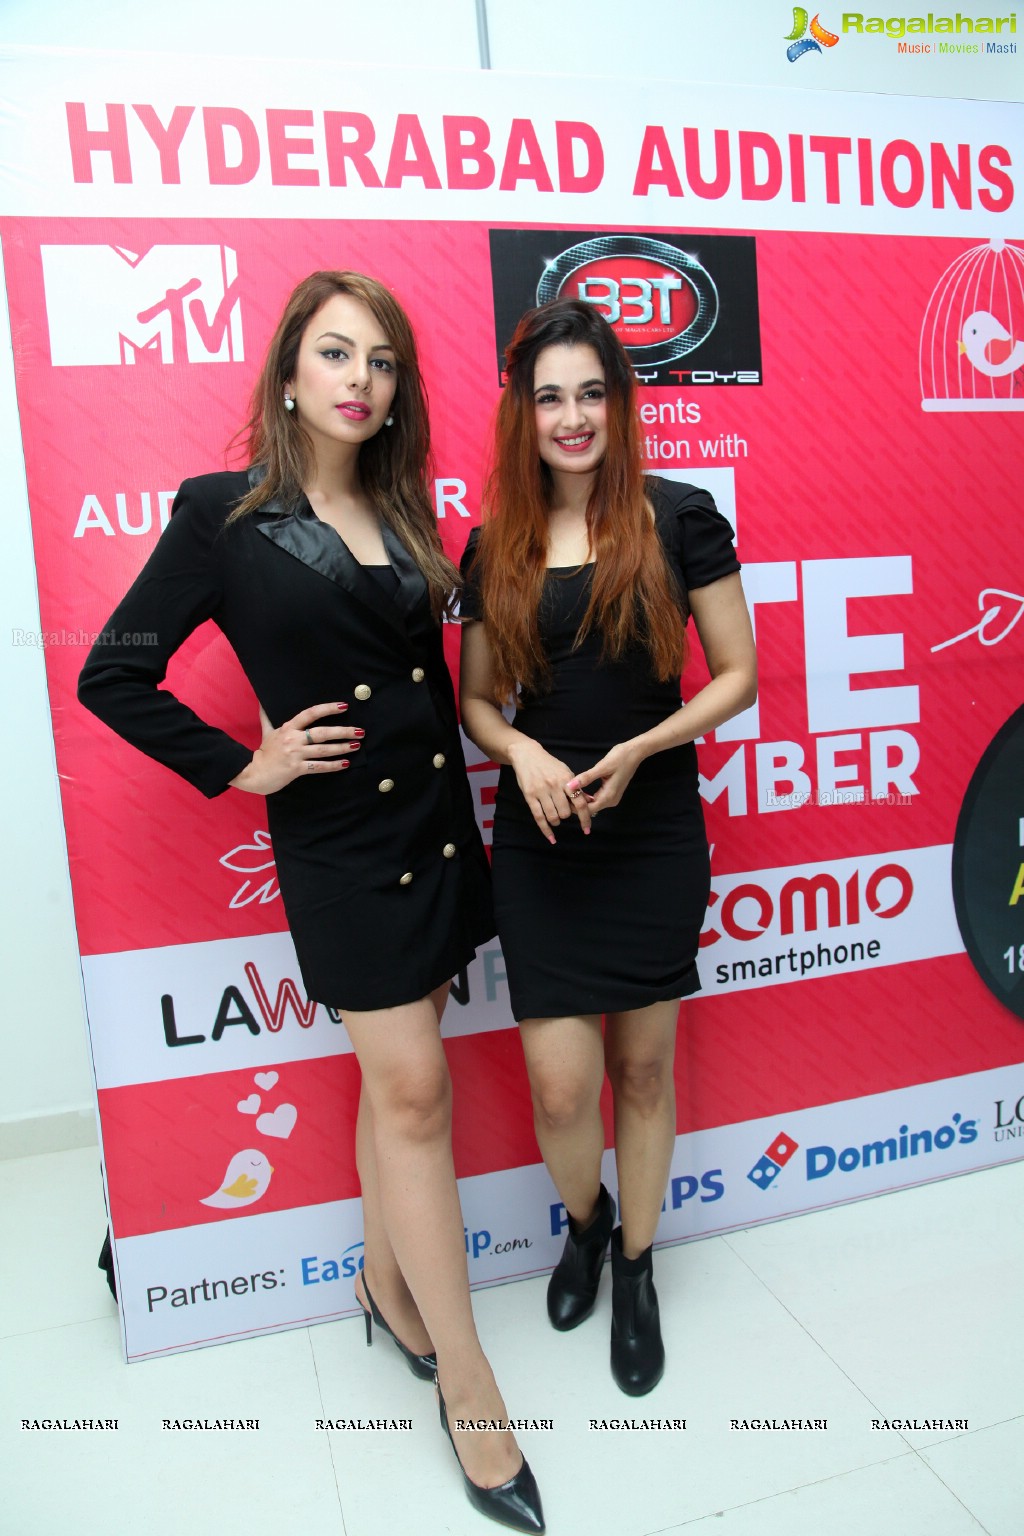 MTV 'A Date To Remember' Auditions at Podium Mall